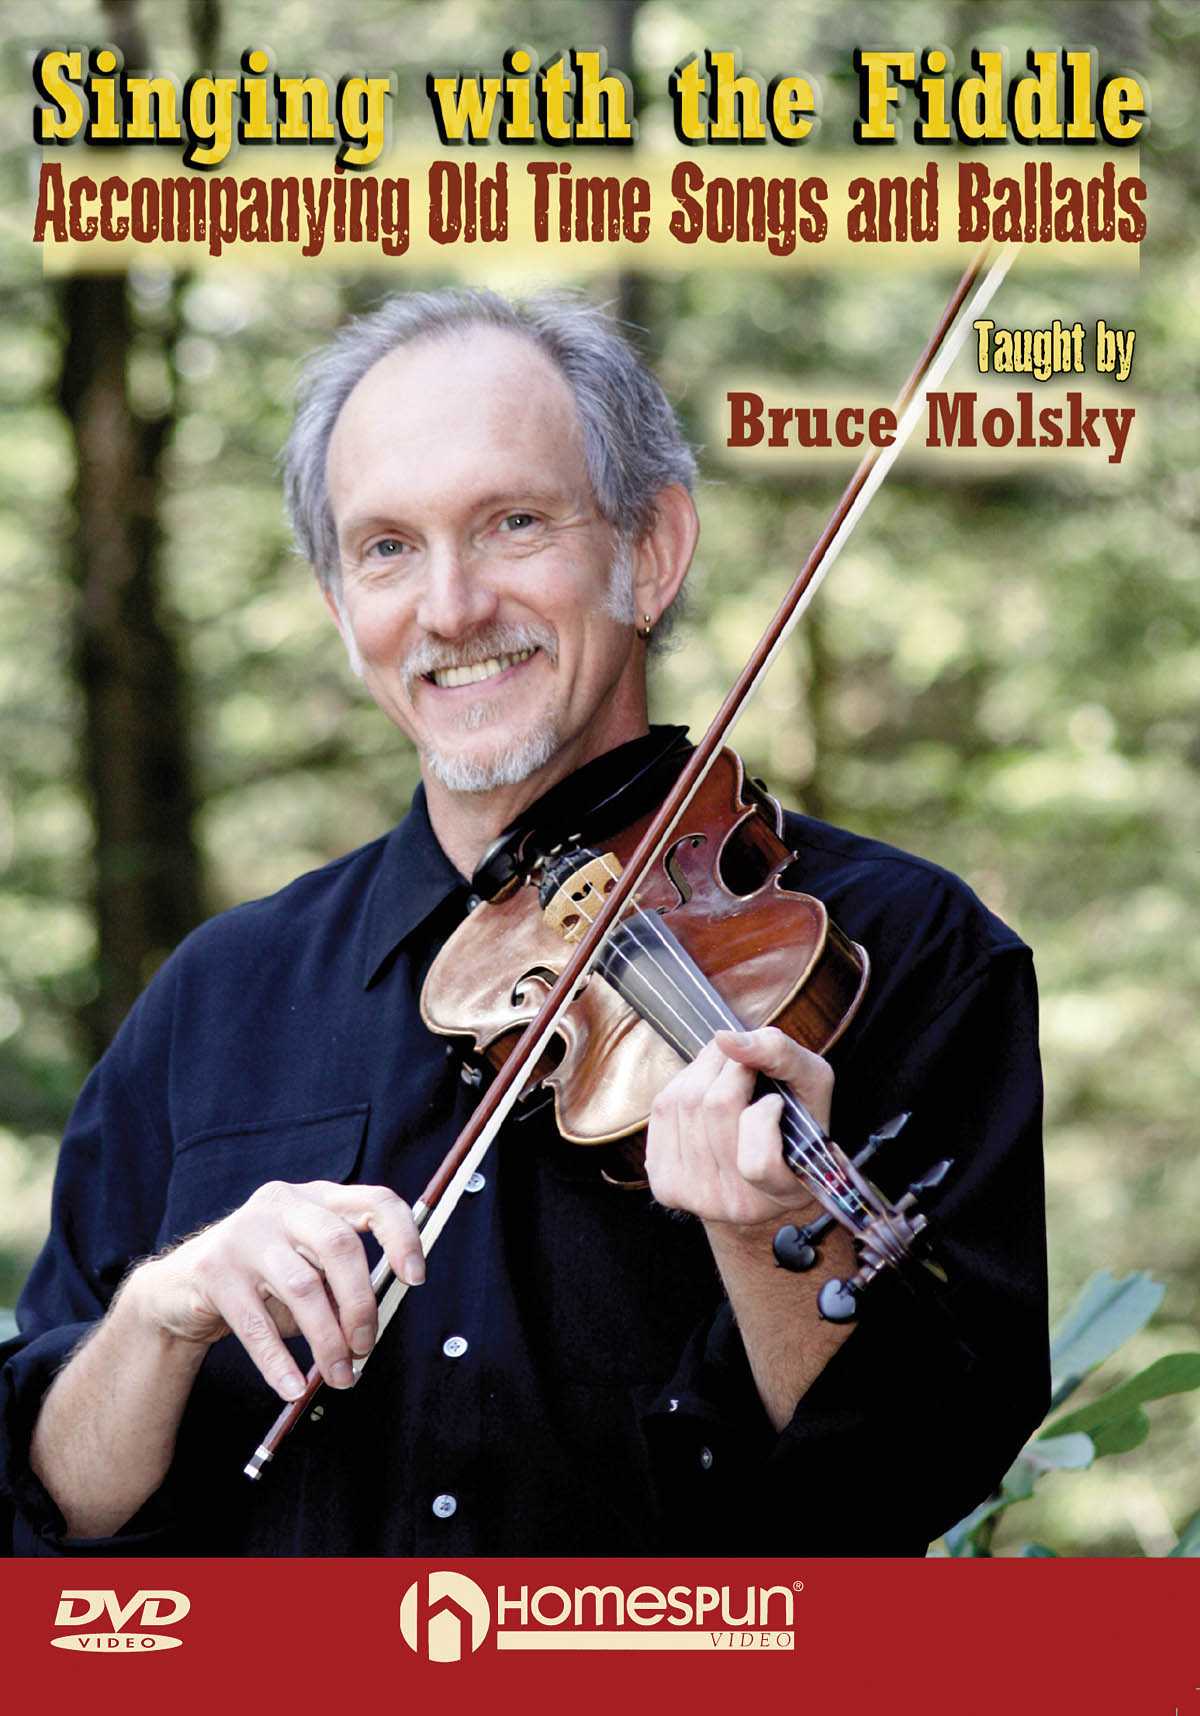 Image 1 of DIGITAL DOWNLOAD ONLY - Singing with the Fiddle: Accompanying Old Time Songs and Ballads - SKU# 300-DVD298 : Product Type Media : Elderly Instruments